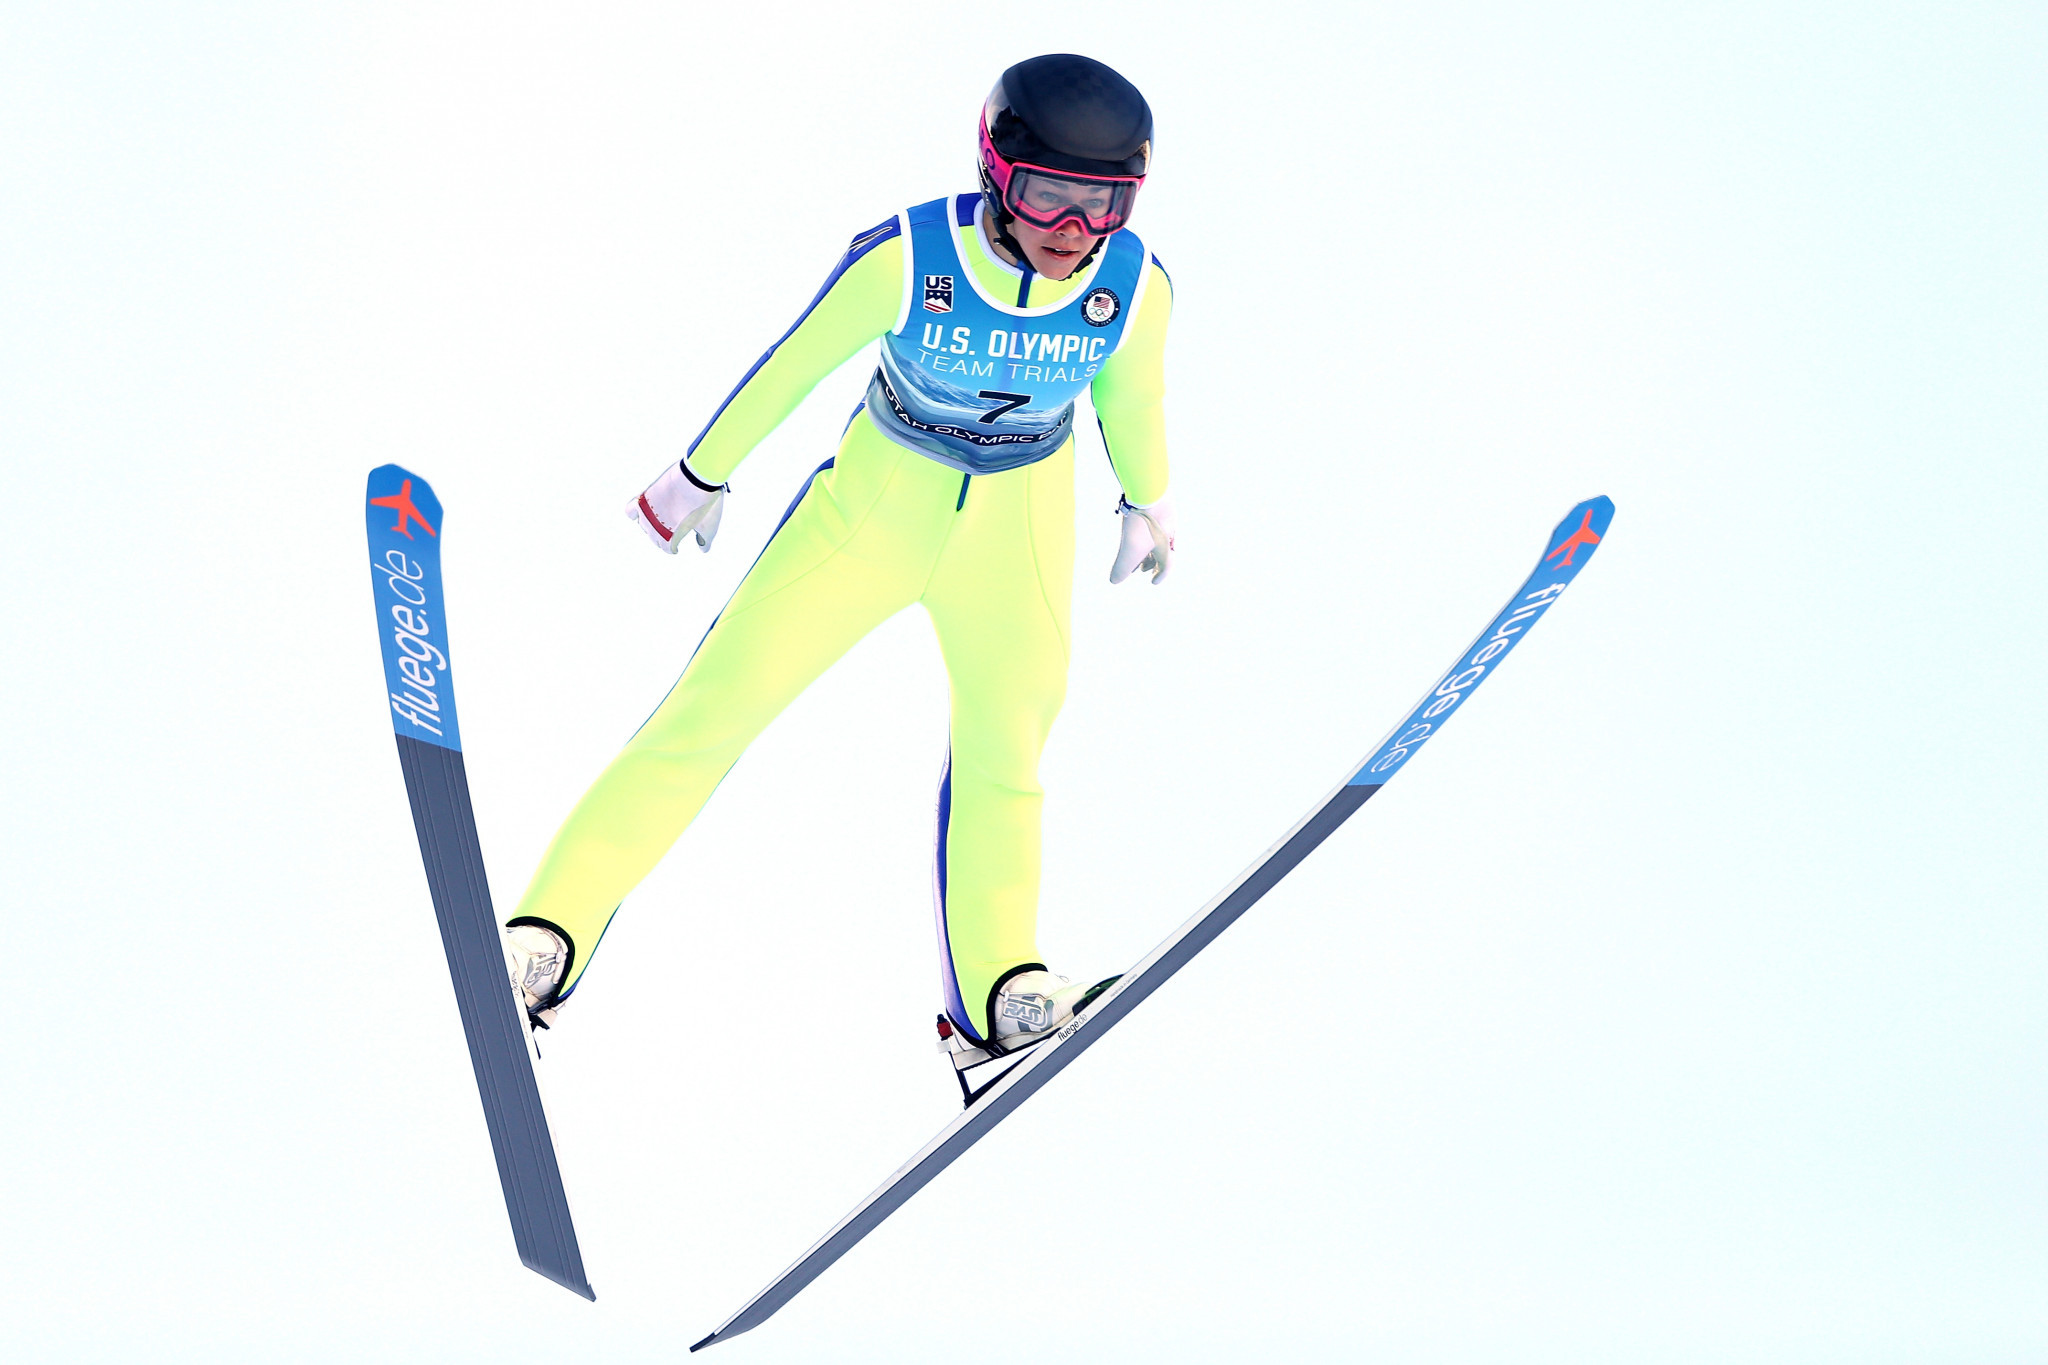 Ski jumper Sarah Hendrickson was among the three latest American athletes to qualify for Pyeongchang 2018 ©Getty Images